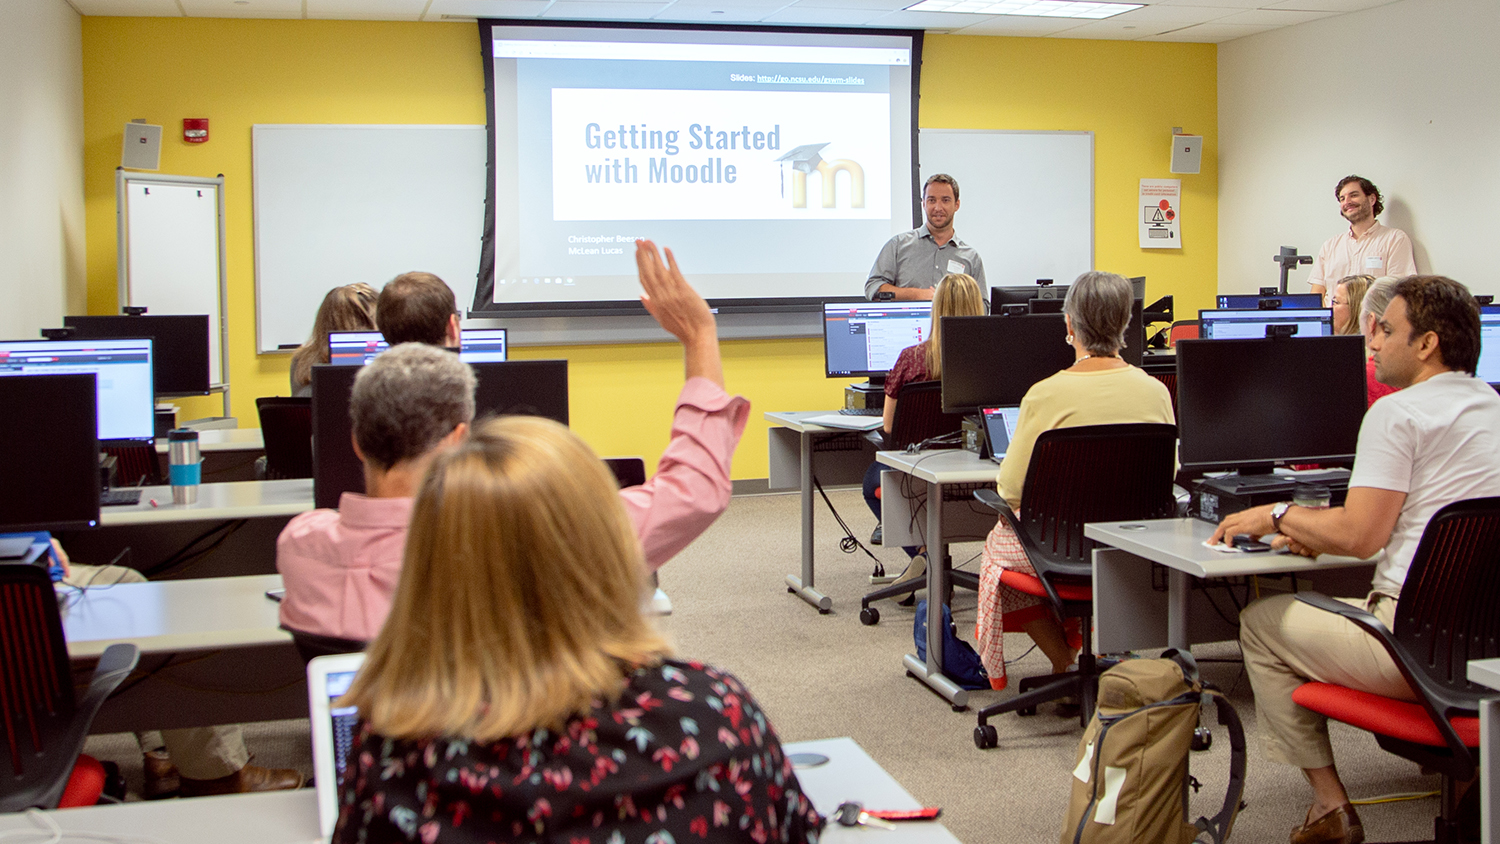 Christopher Beeson and McLean Lucas stand at the front of a computer lab room. There are participants at computer stations around the room. One participant is raising his hand. The screen says "Getting Started with Moodle."